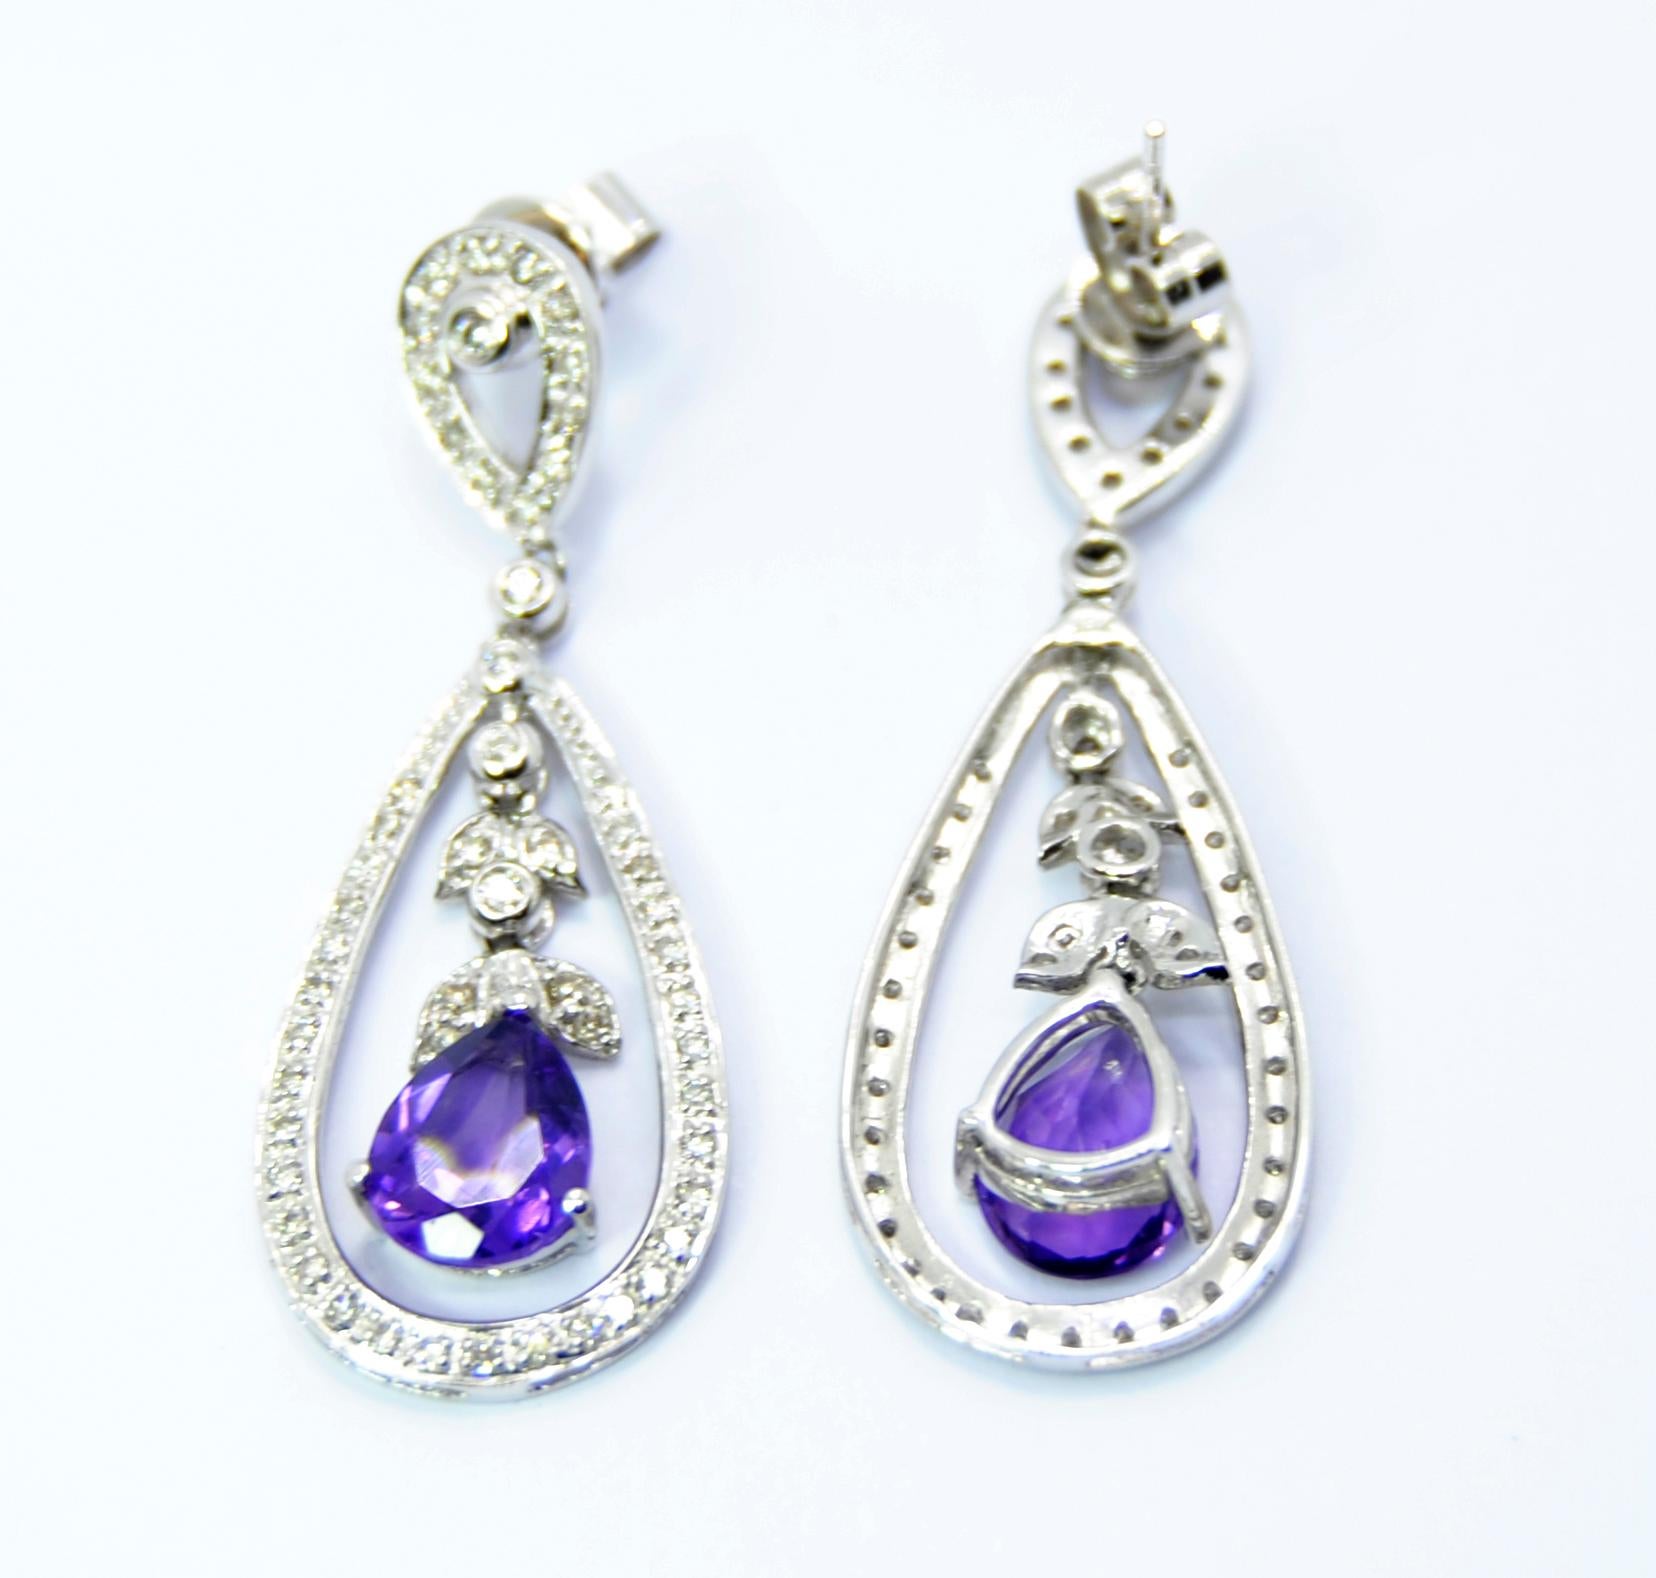 Romantic and nupcial Earrings in 18kt gold with pave of diamonds and 2ct pear shape amethyst
Each earring weights 4ct. and measures 42 mm 